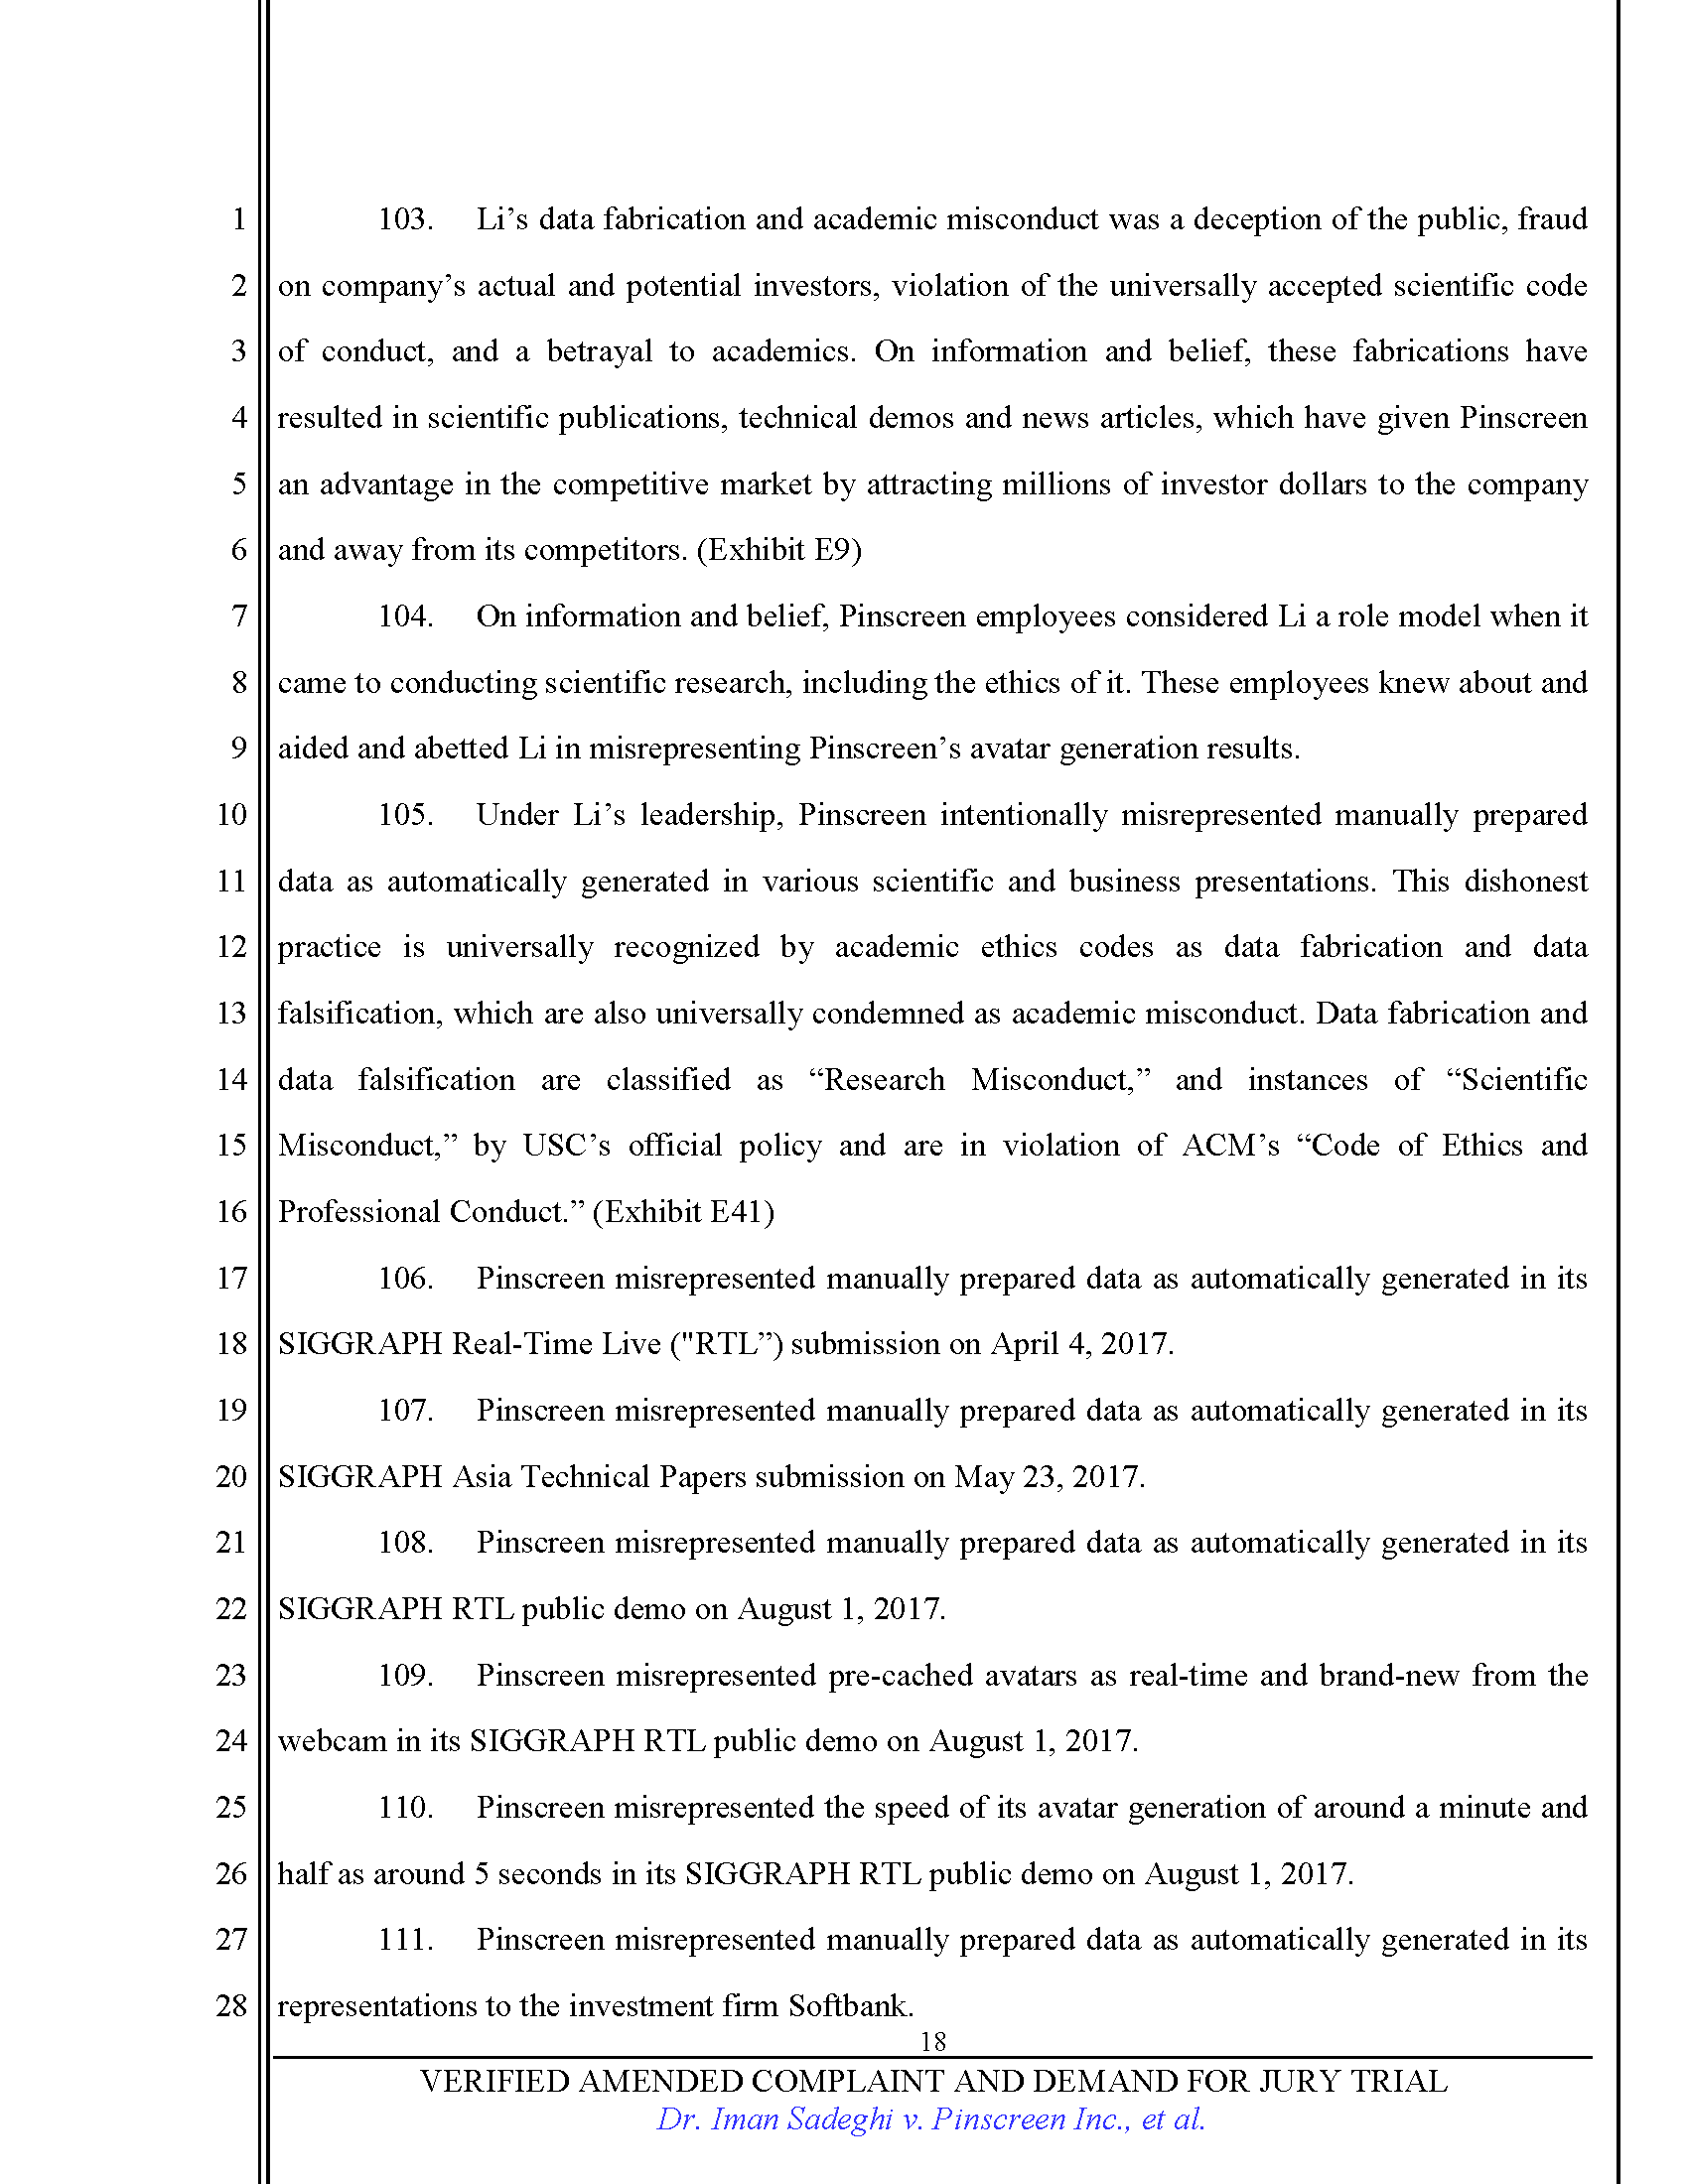 First Amended Complaint (FAC) Page 18